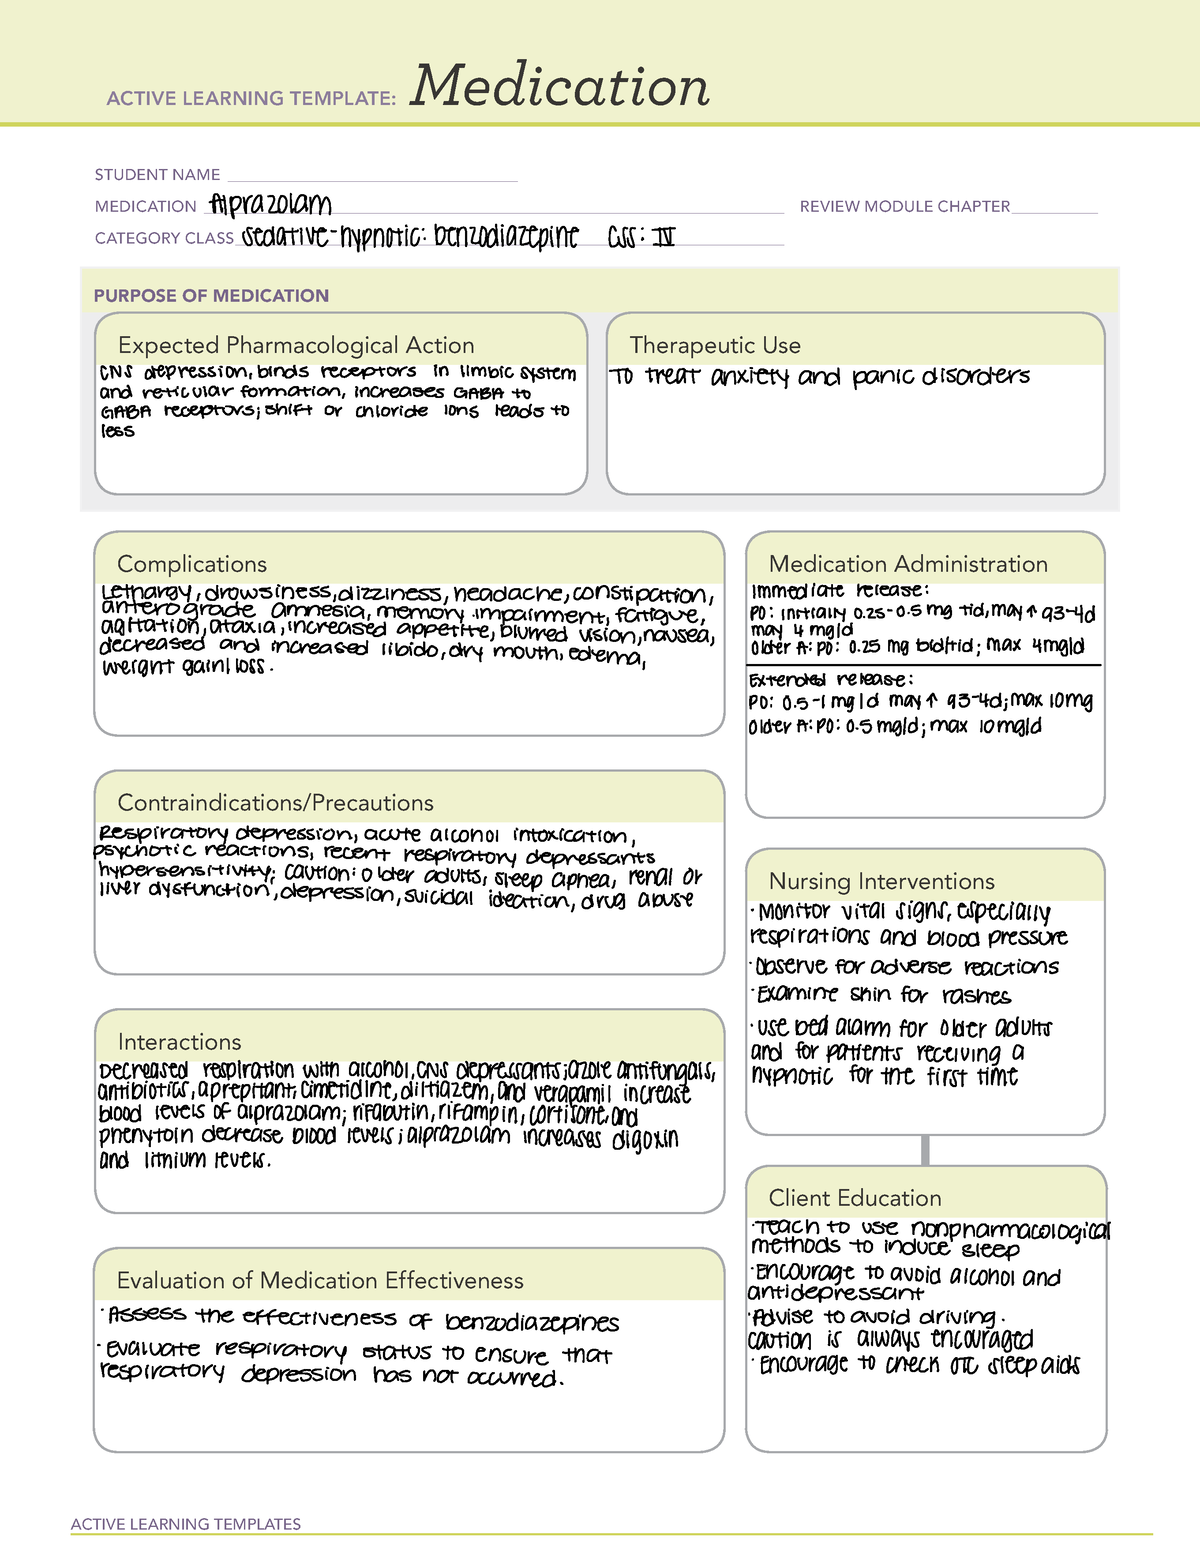 active-learning-template-alprazolam-active-learning-templates